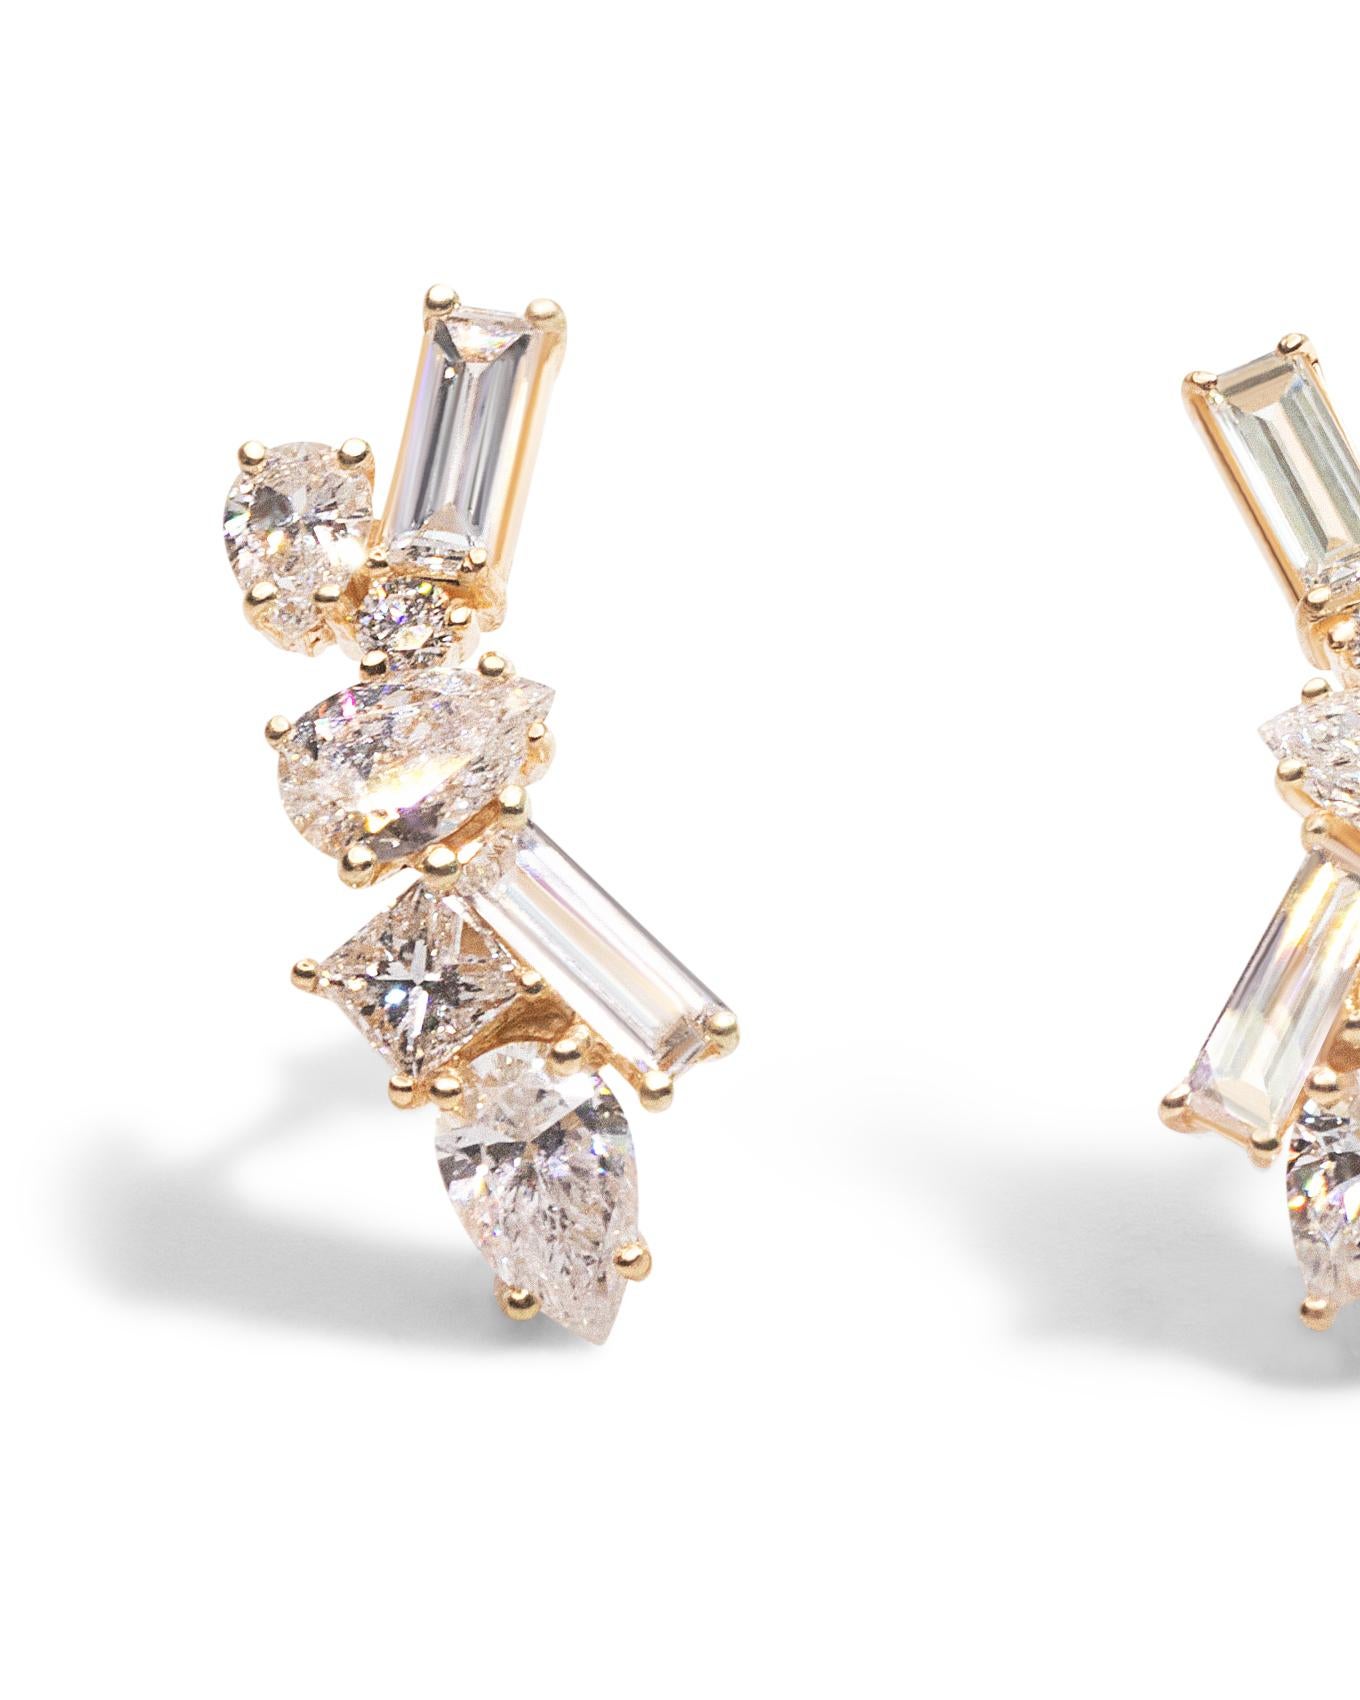 Intention: Defying the expected

Design: Incorporating four different fancy cuts of diamonds, this bar-style earring demonstrates the beauty of diversity.

Style Suggestion: ﻿When you need a little something to set off a look and take it (and your